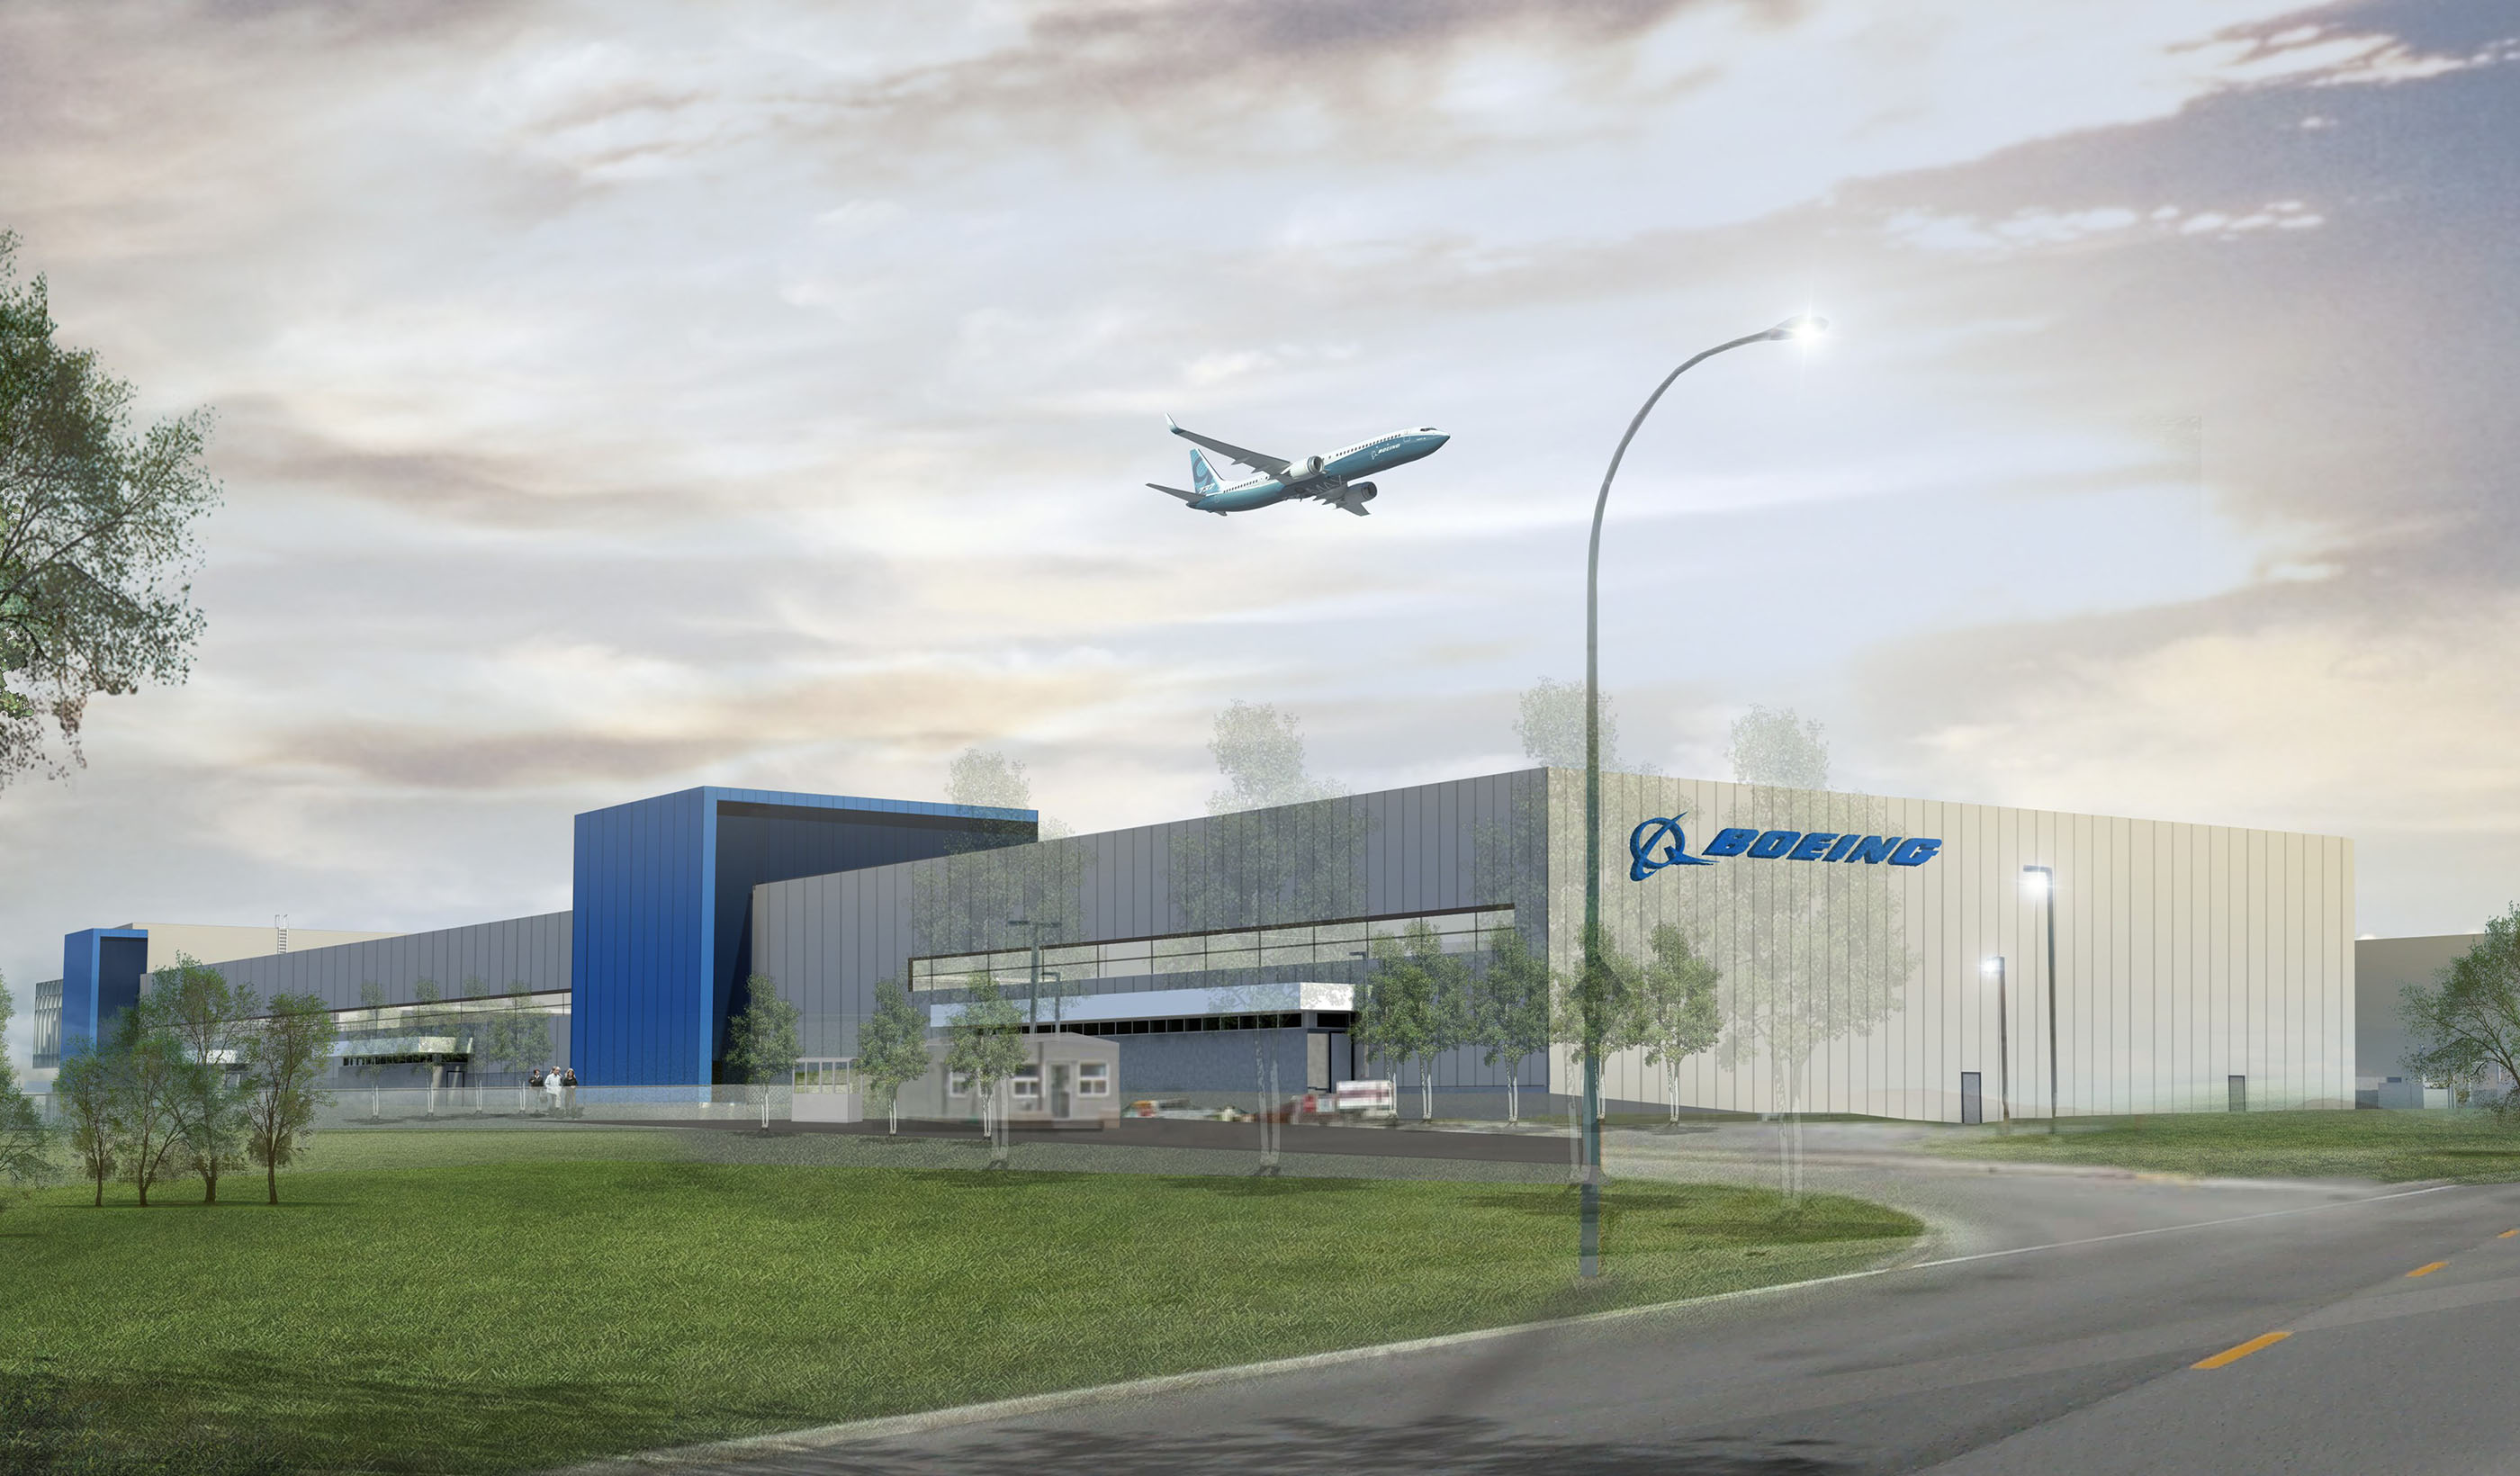 Boeing West Manufacturing and Fabrication Facility